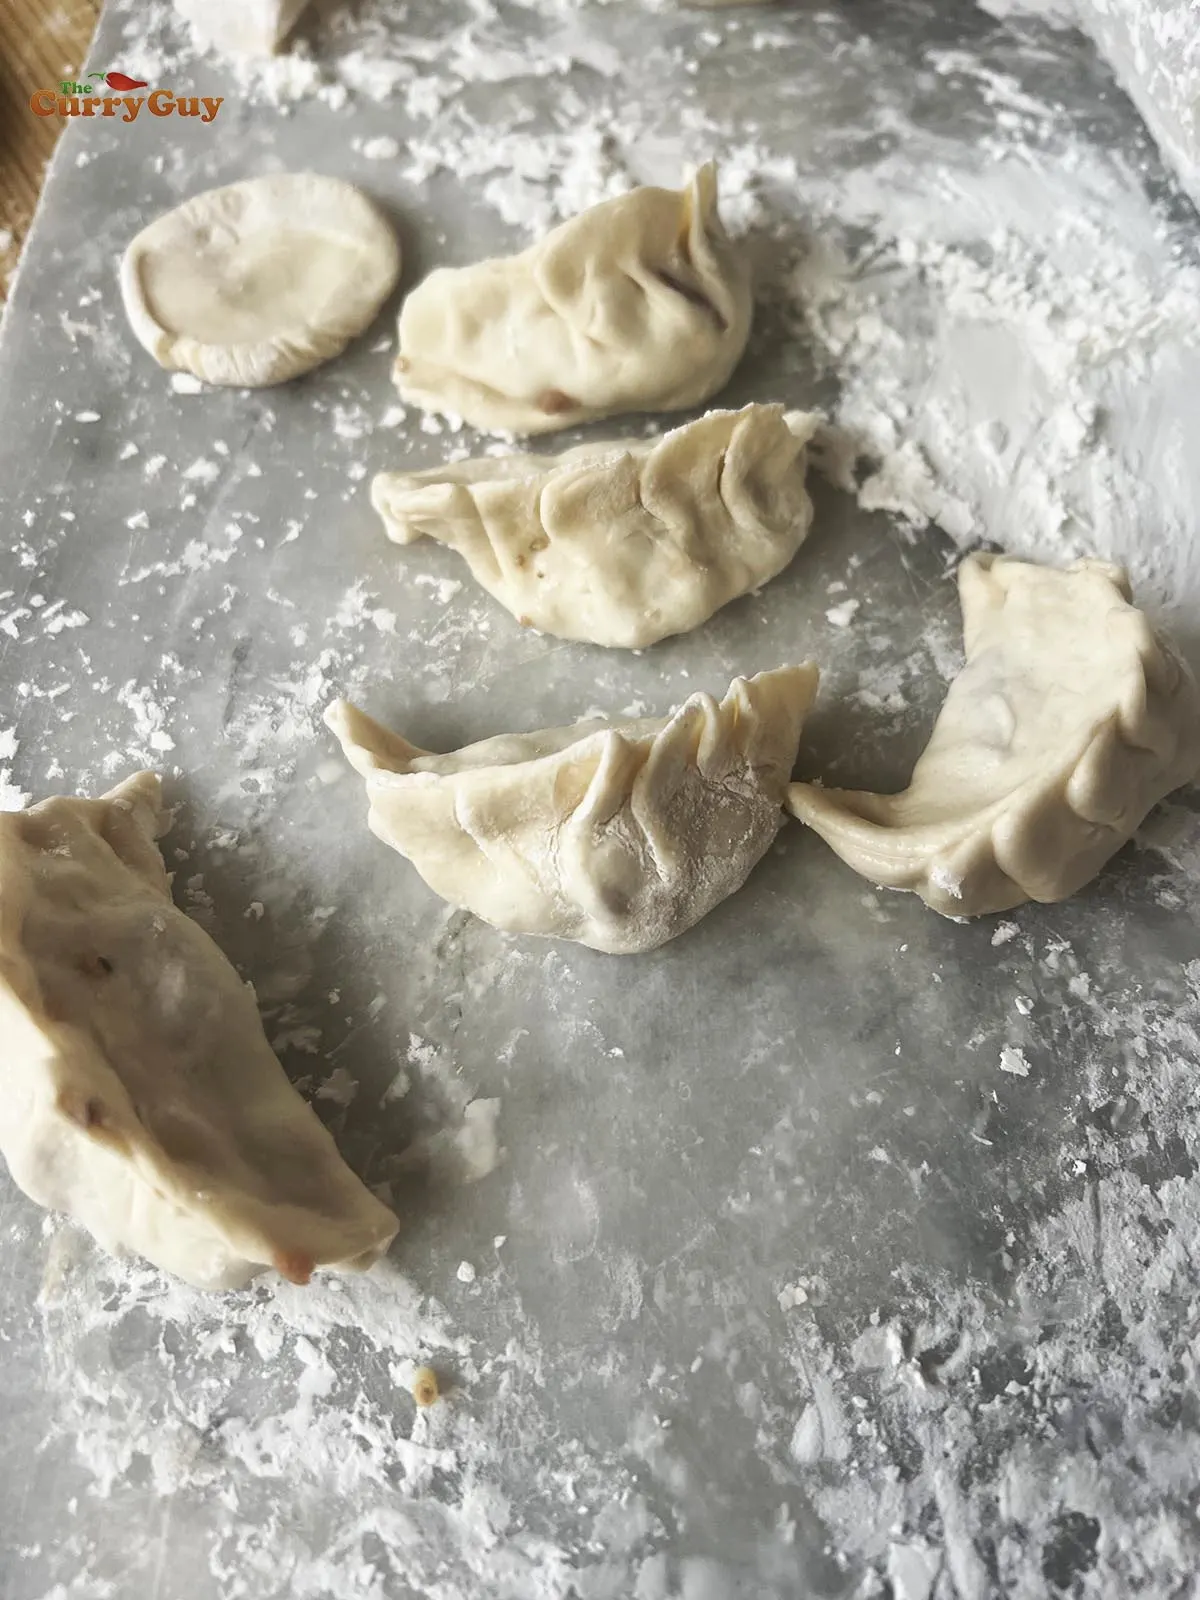 beef momos ready for steaming.